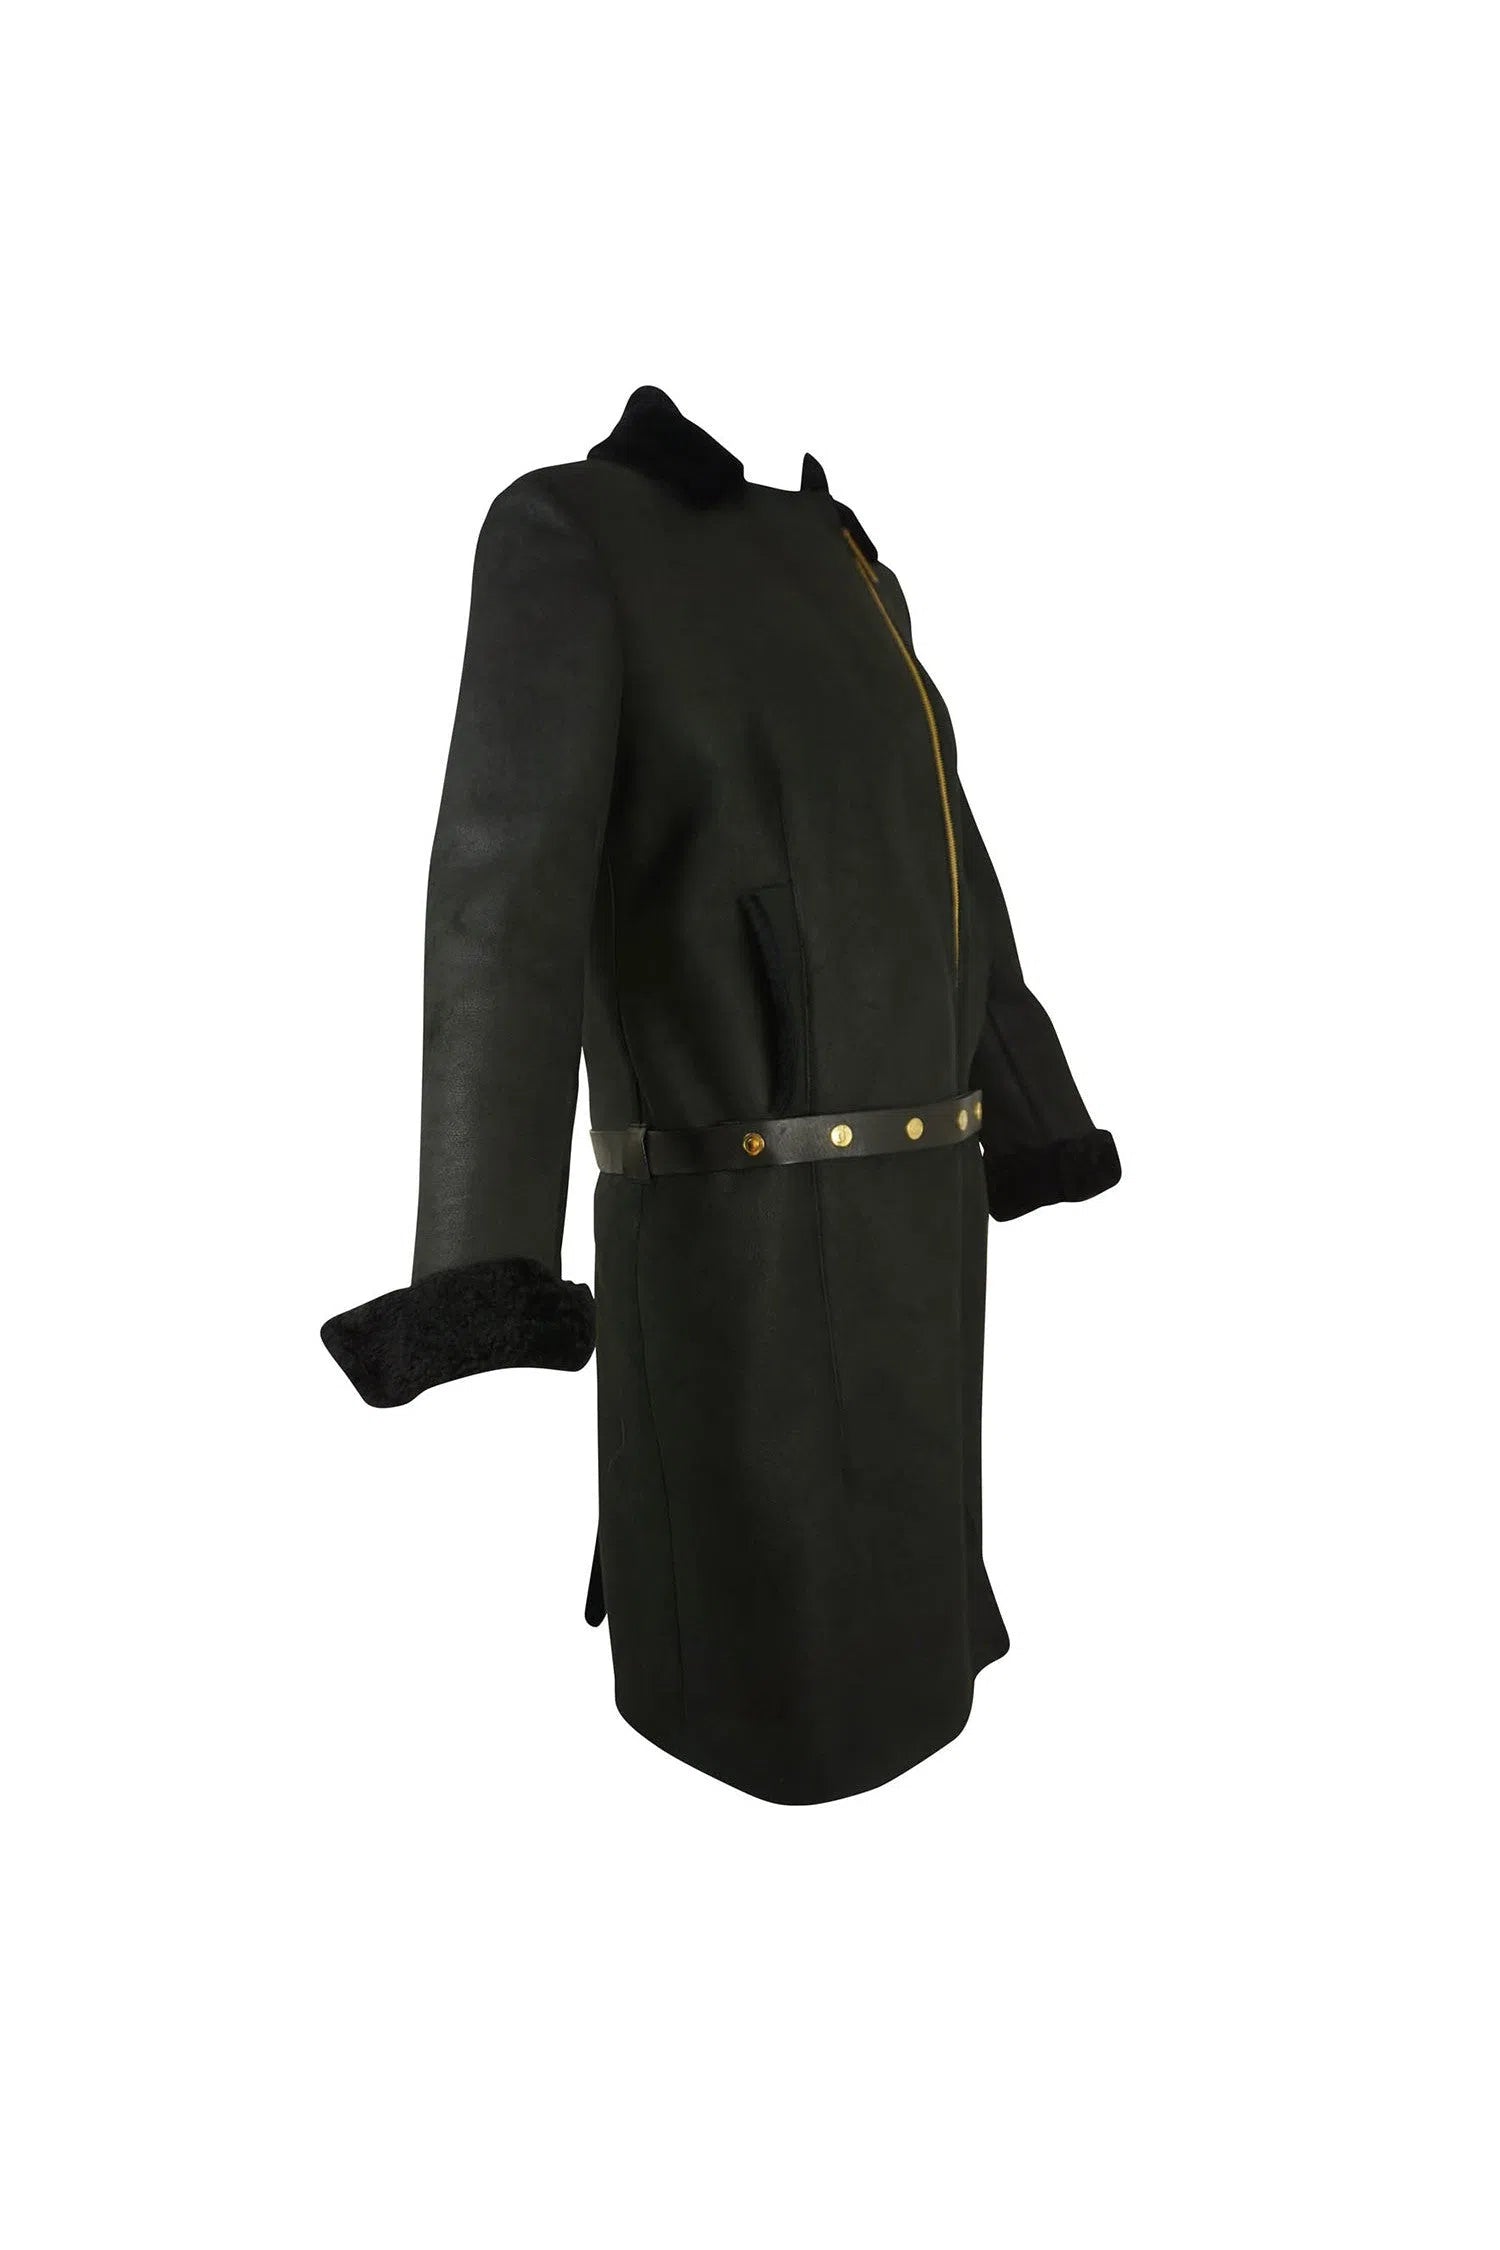 Gucci vintage Tom Ford Belted Shearling Coat 1990's - Foxy Couture Carmel